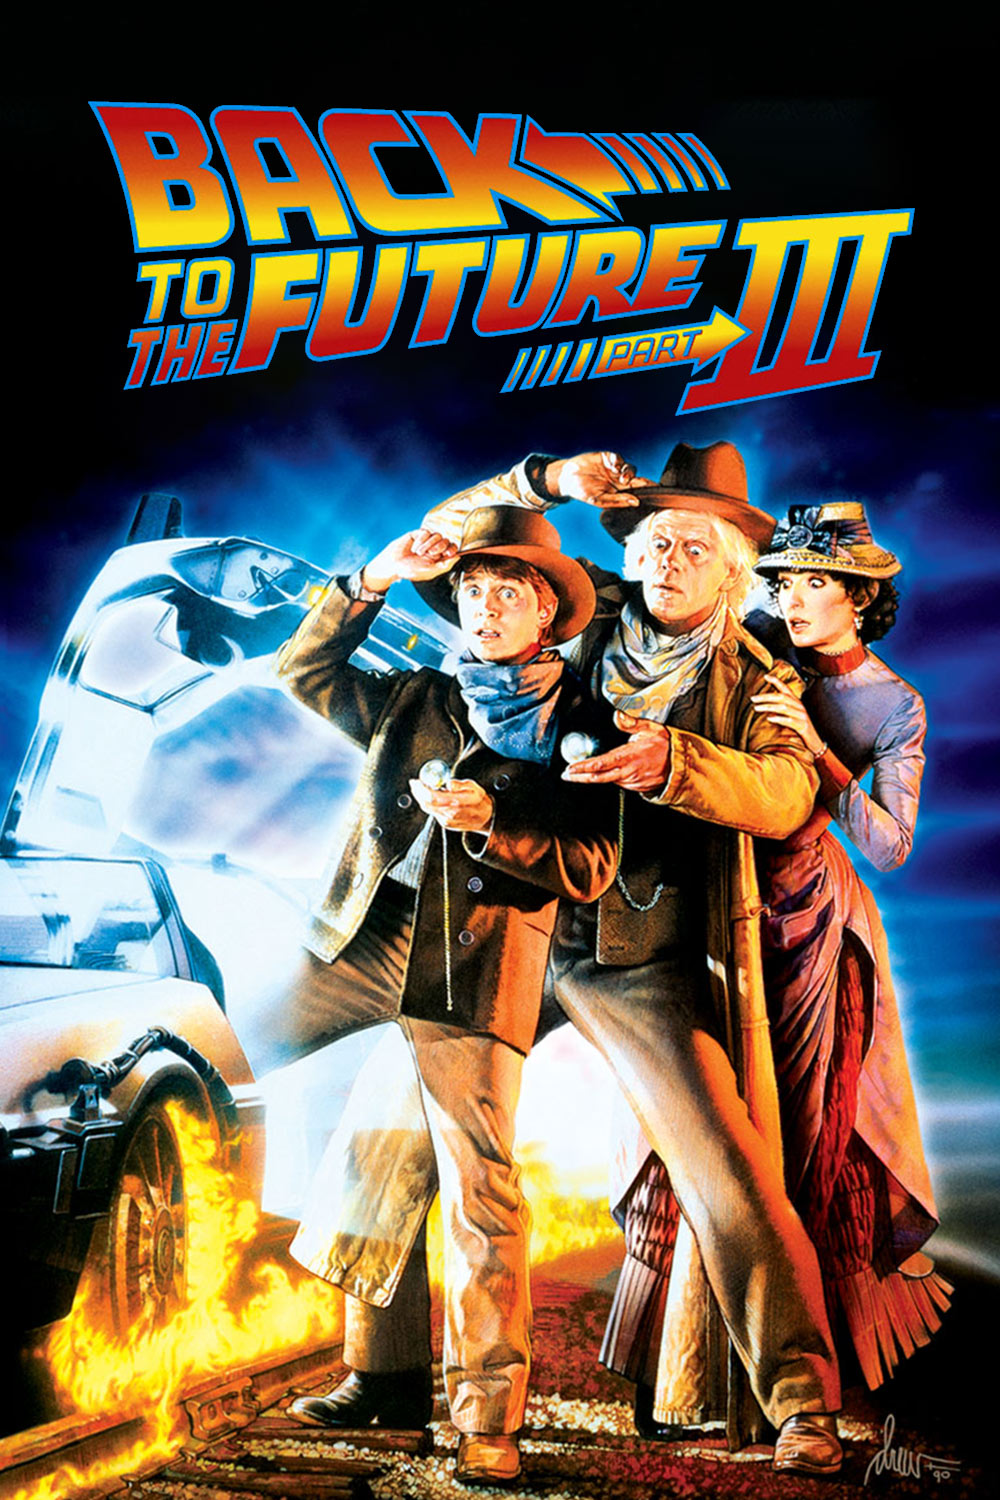 Watch Back to the Future Part III Online